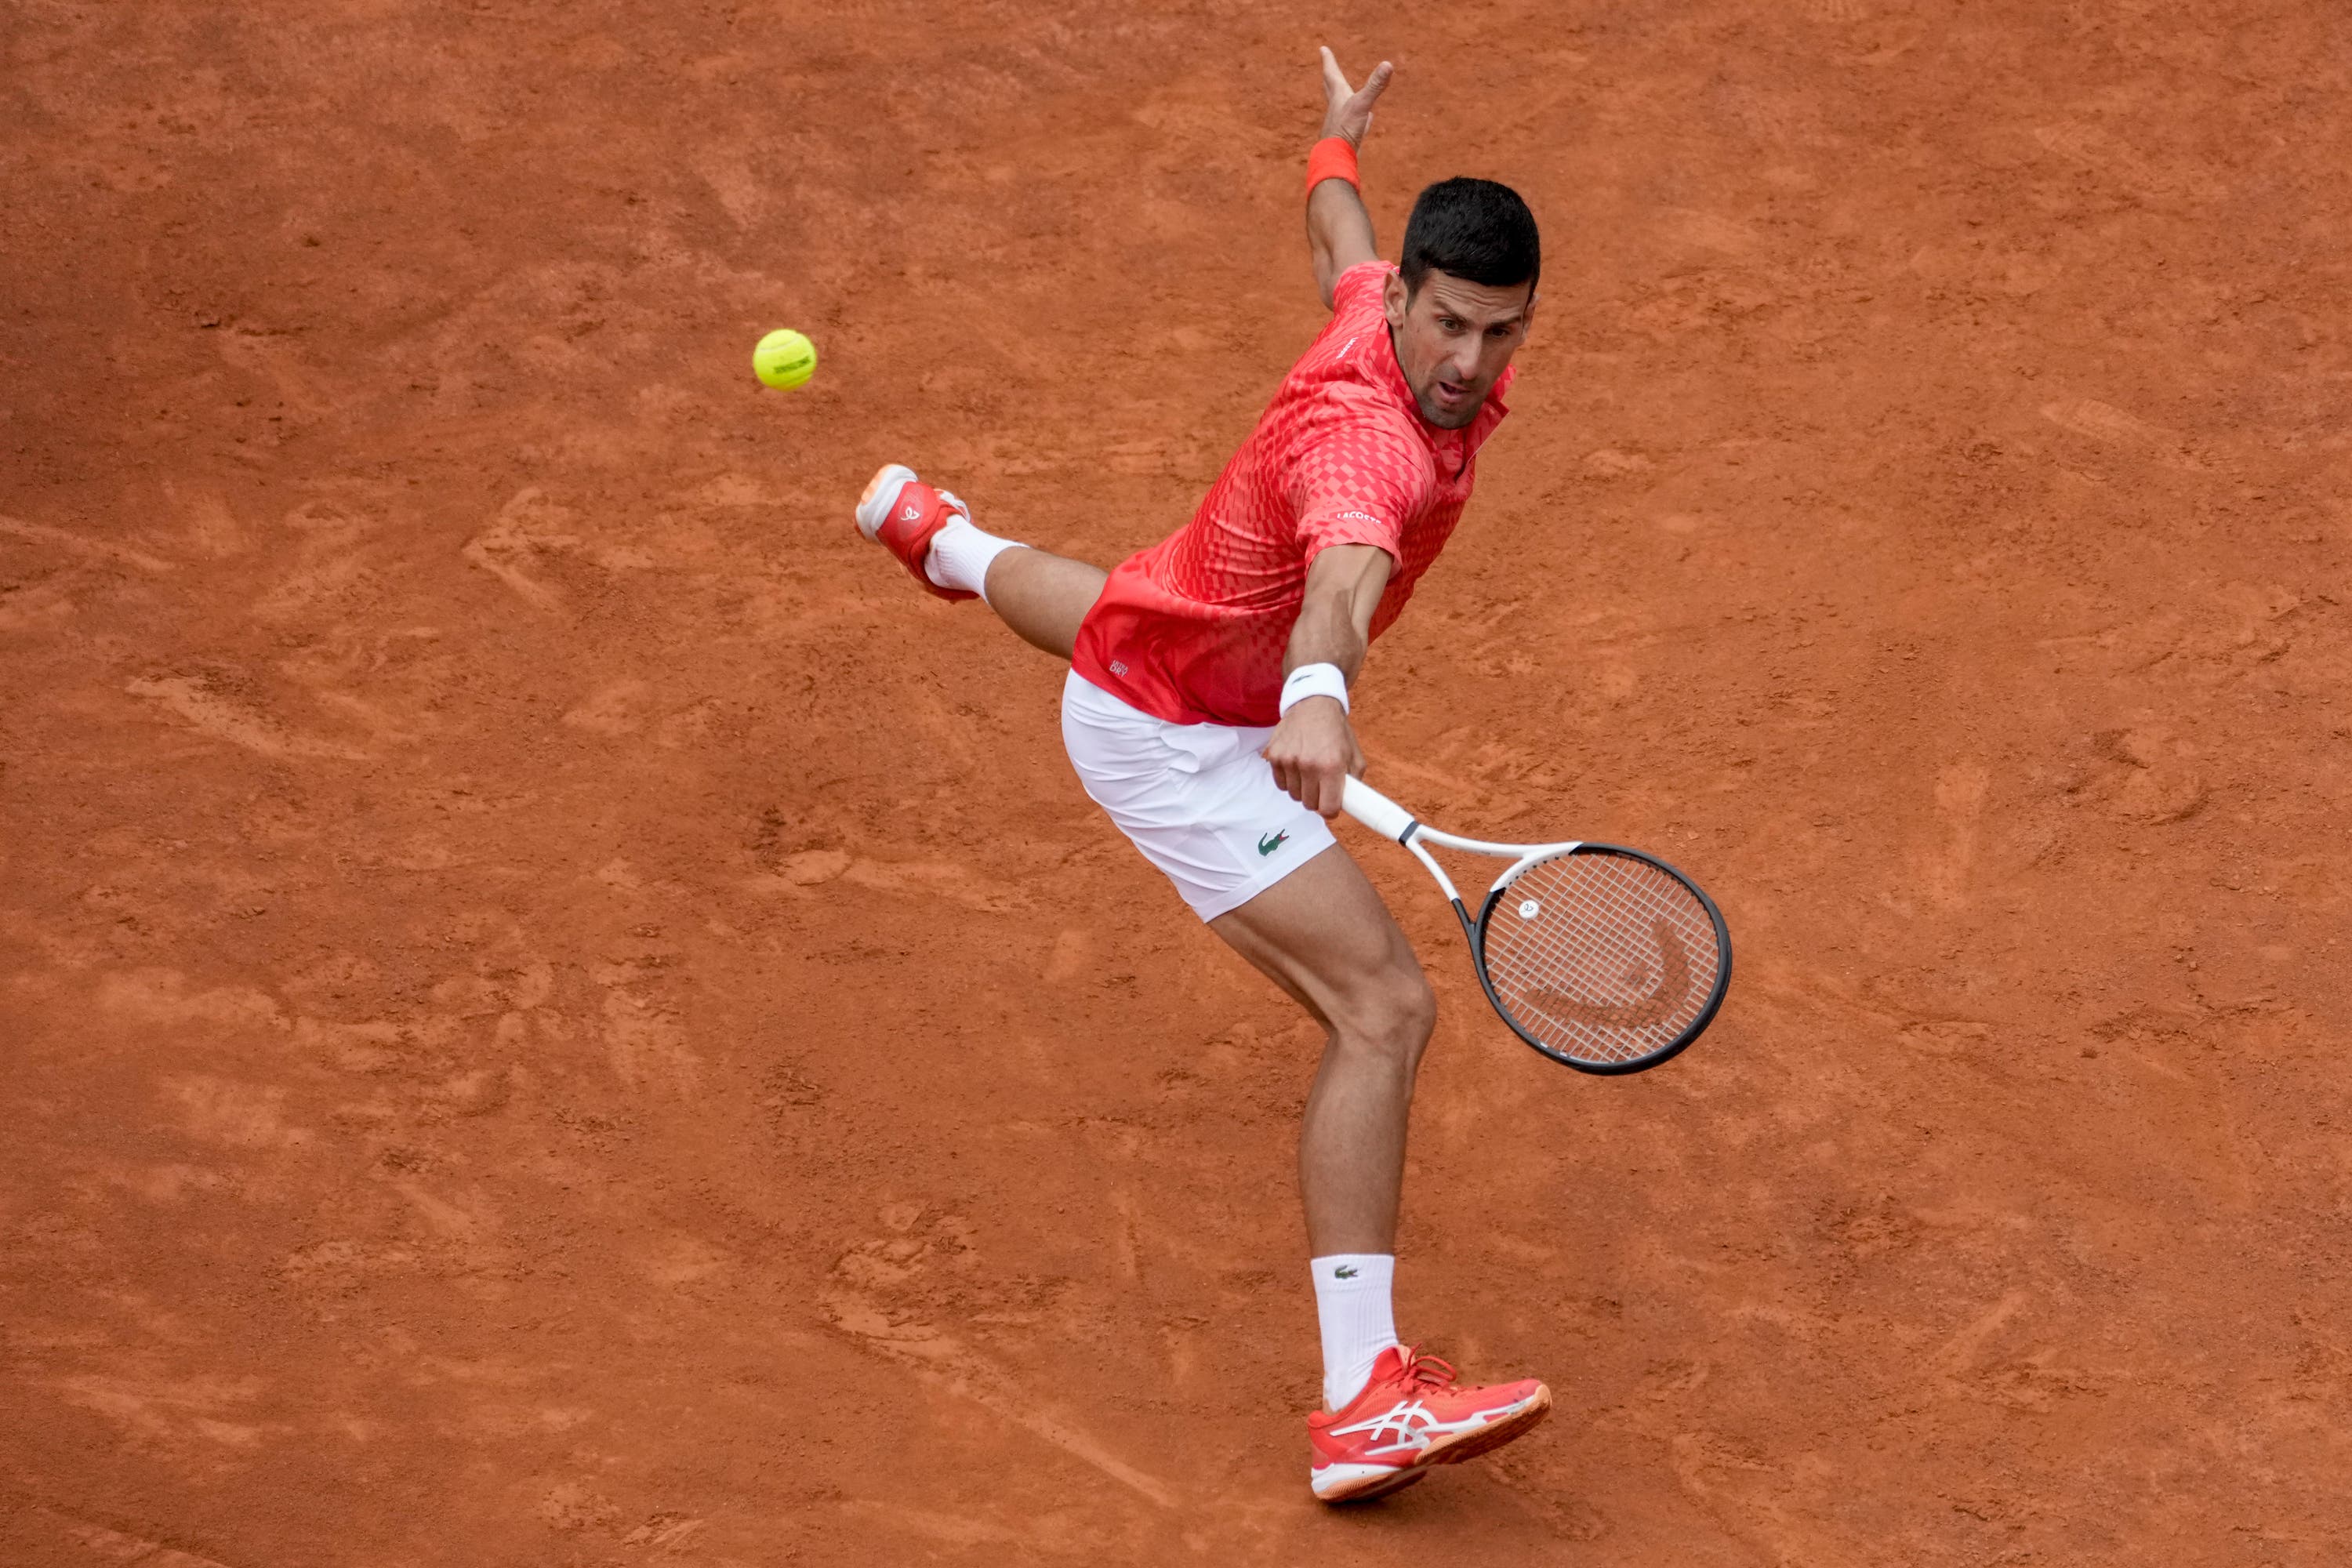 <em>Novak Djokovic slides into a backhand (Andrew Medichini/AP)</em>”/><cite class=cite></cite></div><figcaption aria-hidden=true><em>Novak Djokovic slides into a backhand (Andrew Medichini/AP)</em> <cite class=hidden></cite></figcaption></figure><p>Norrie withstood pressure after the smash incident to hold his serve until 4-4, when Djokovic, who has never failed to make the quarter-finals in Rome, made the decisive move.</p><p>The 35-year-old was serving noticeably slower than usual but he was coy on the reason for a visit to the treatment room that delayed the start of the match.</p><p>“Every day is something,” he said. “Thankfully I was able to play and finish the match, so hopefully tomorrow I will feel even better.”</p><p>Djokovic next faces a quarter-final clash with seventh seed Holger Rune, who defeated Alexei Popyrin in three sets, while fifth seed Stefanos Tsitsipas completed a delayed 6-3 7-6 (3) victory over Italian Lorenzo Sonego.</p><div class=